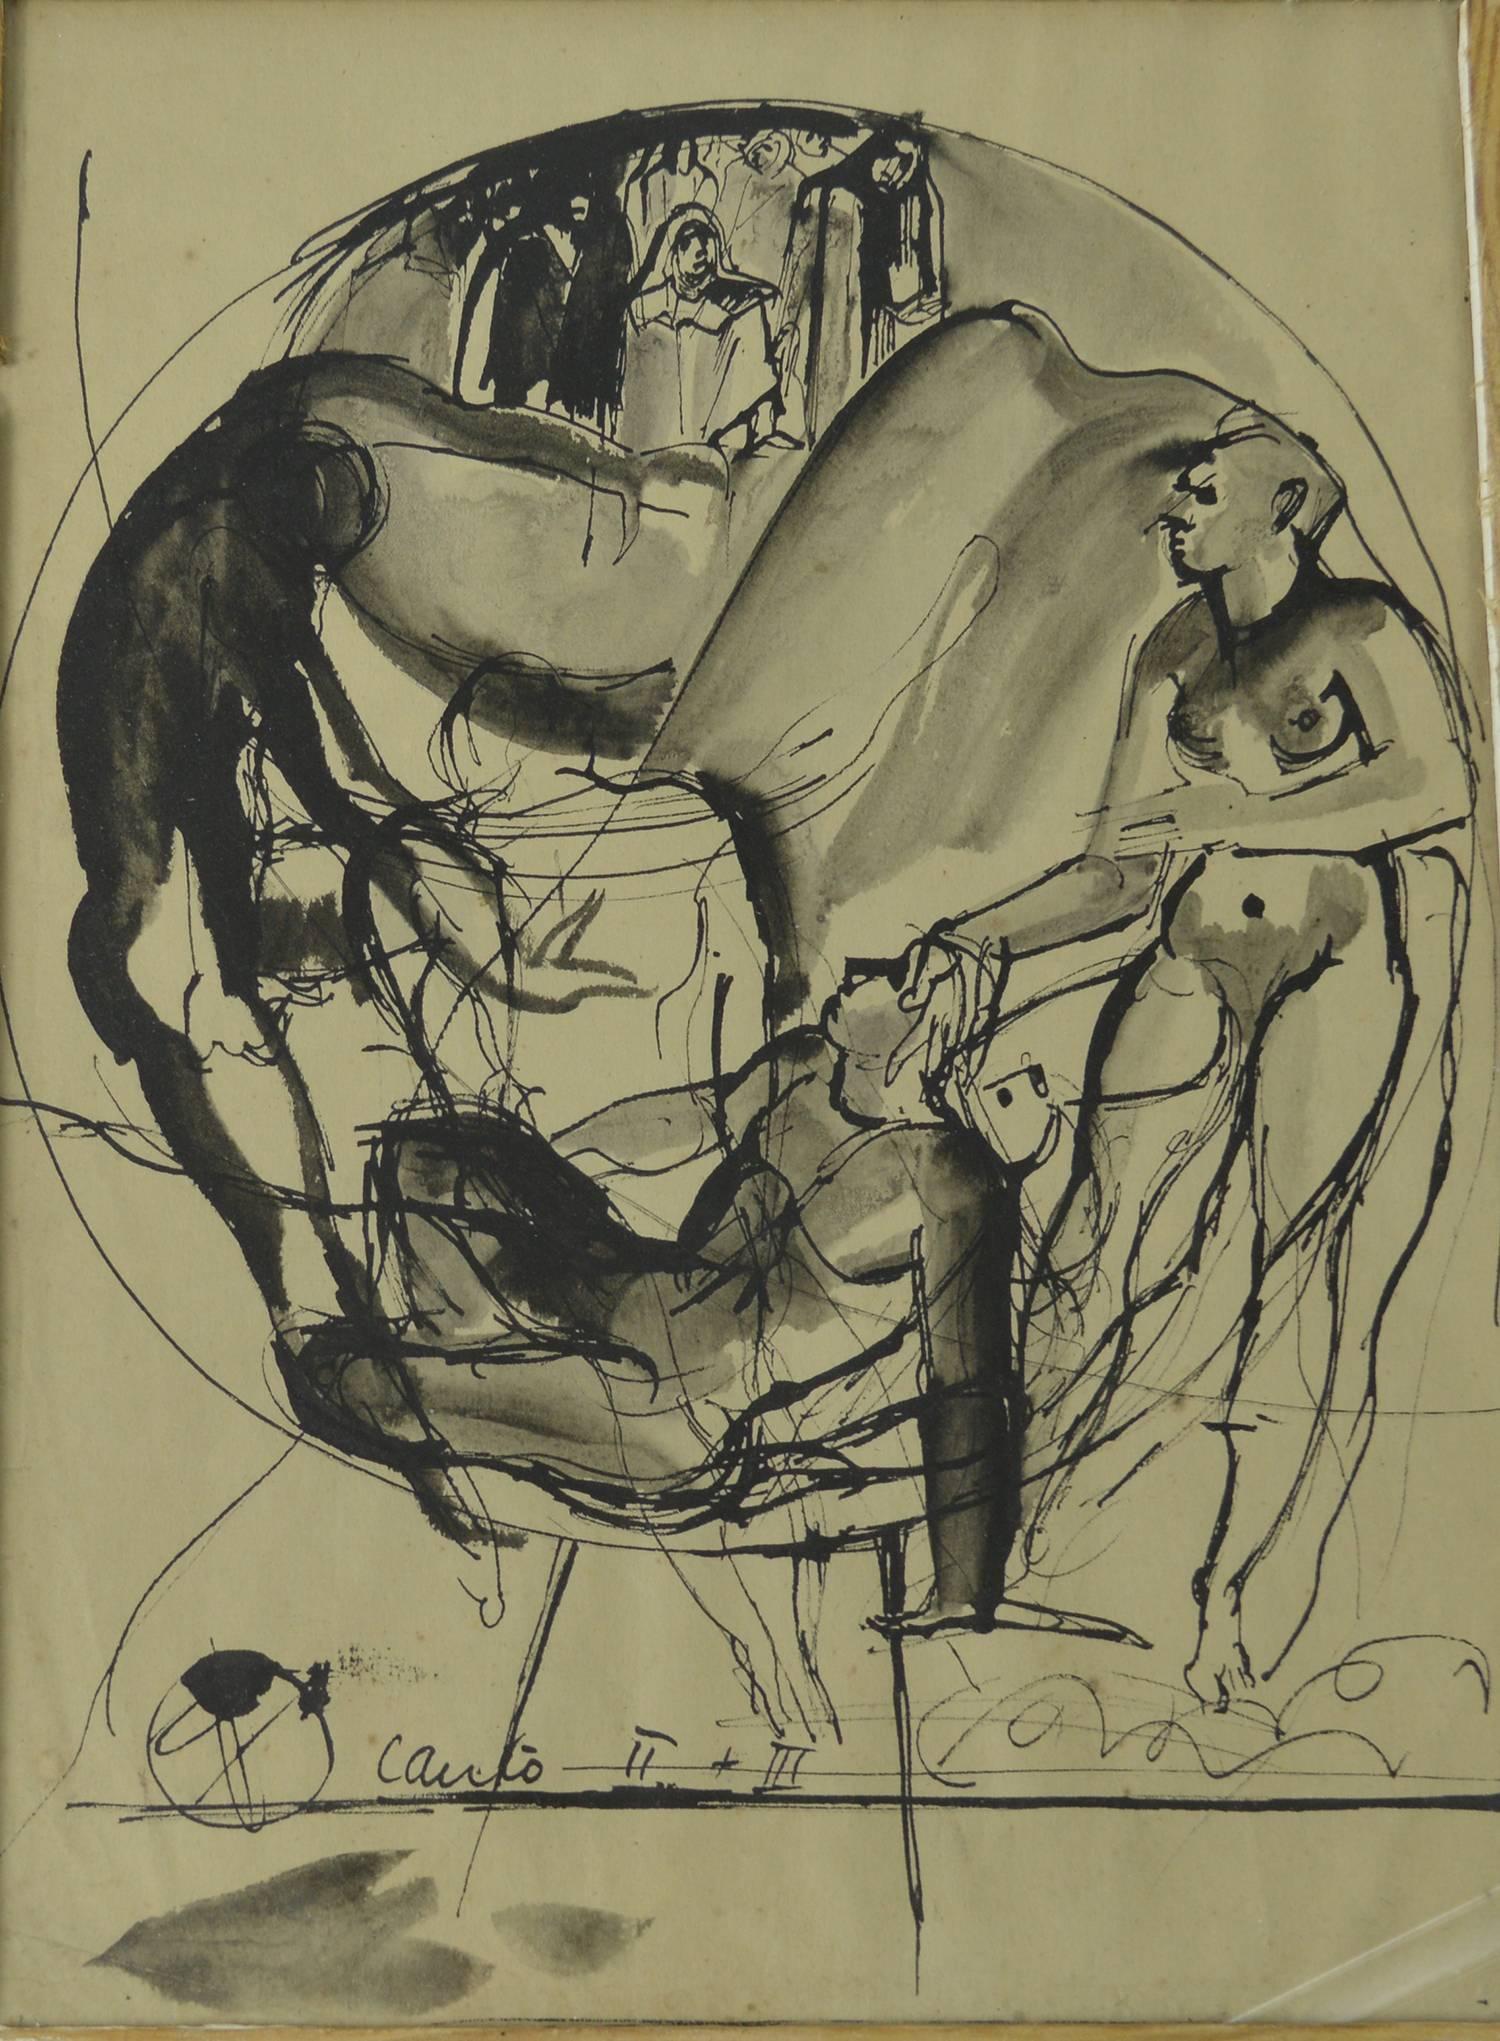 Other Ink and Wash by Peter William Ibbetson, English, circa 1940